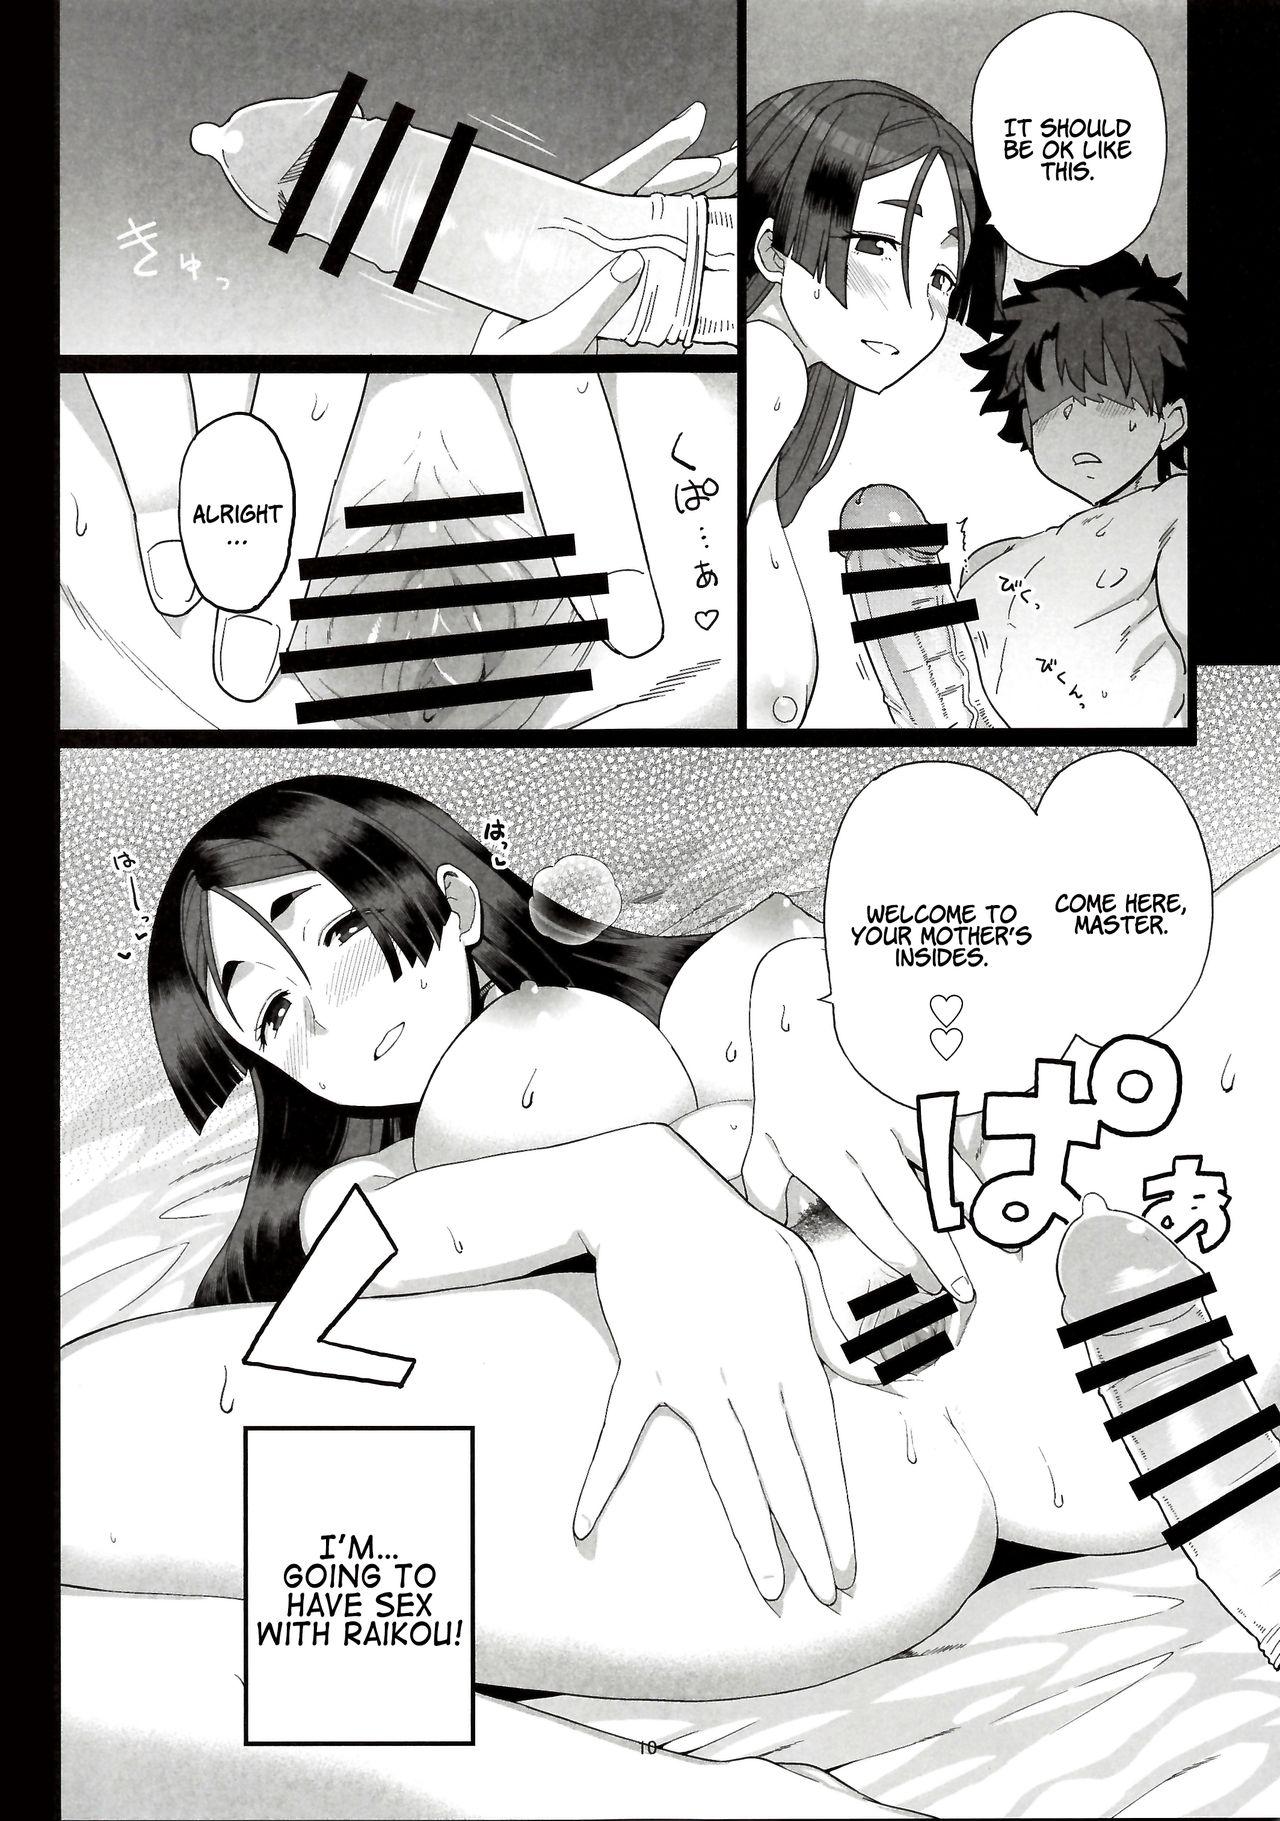 Sperm Raikou Mama to Ecchi Shinai to Derarenai Heya | A Room You Can’t Leave if You Don’t Have Sex with Raikou Mama - Fate grand order Interview - Page 12